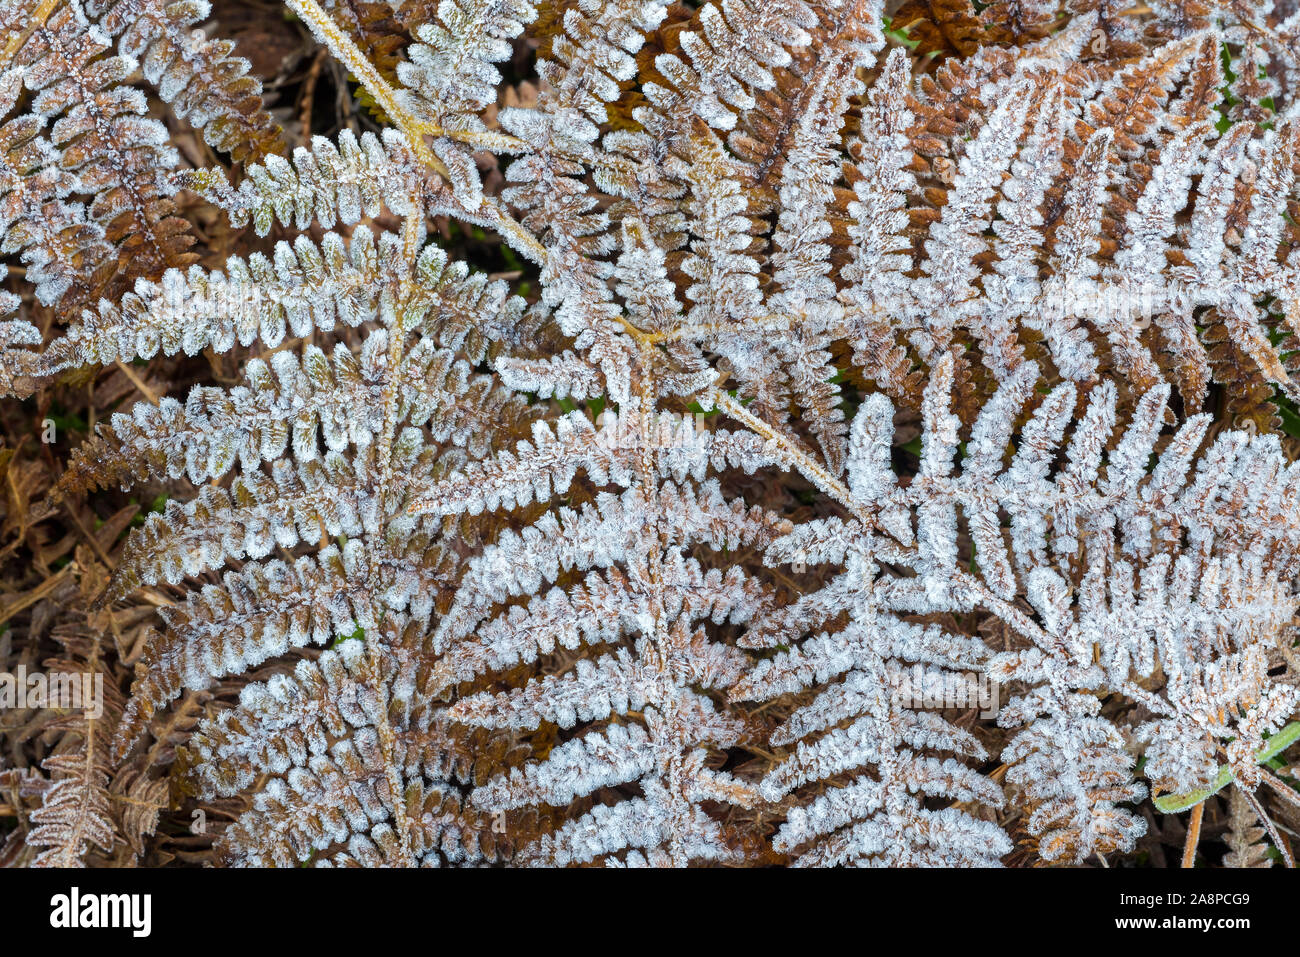 Fronds of common bracken / eagle fern (Pteridium aquilinum) covered in hoarfrost / hoar frost in autumn / fall Stock Photo